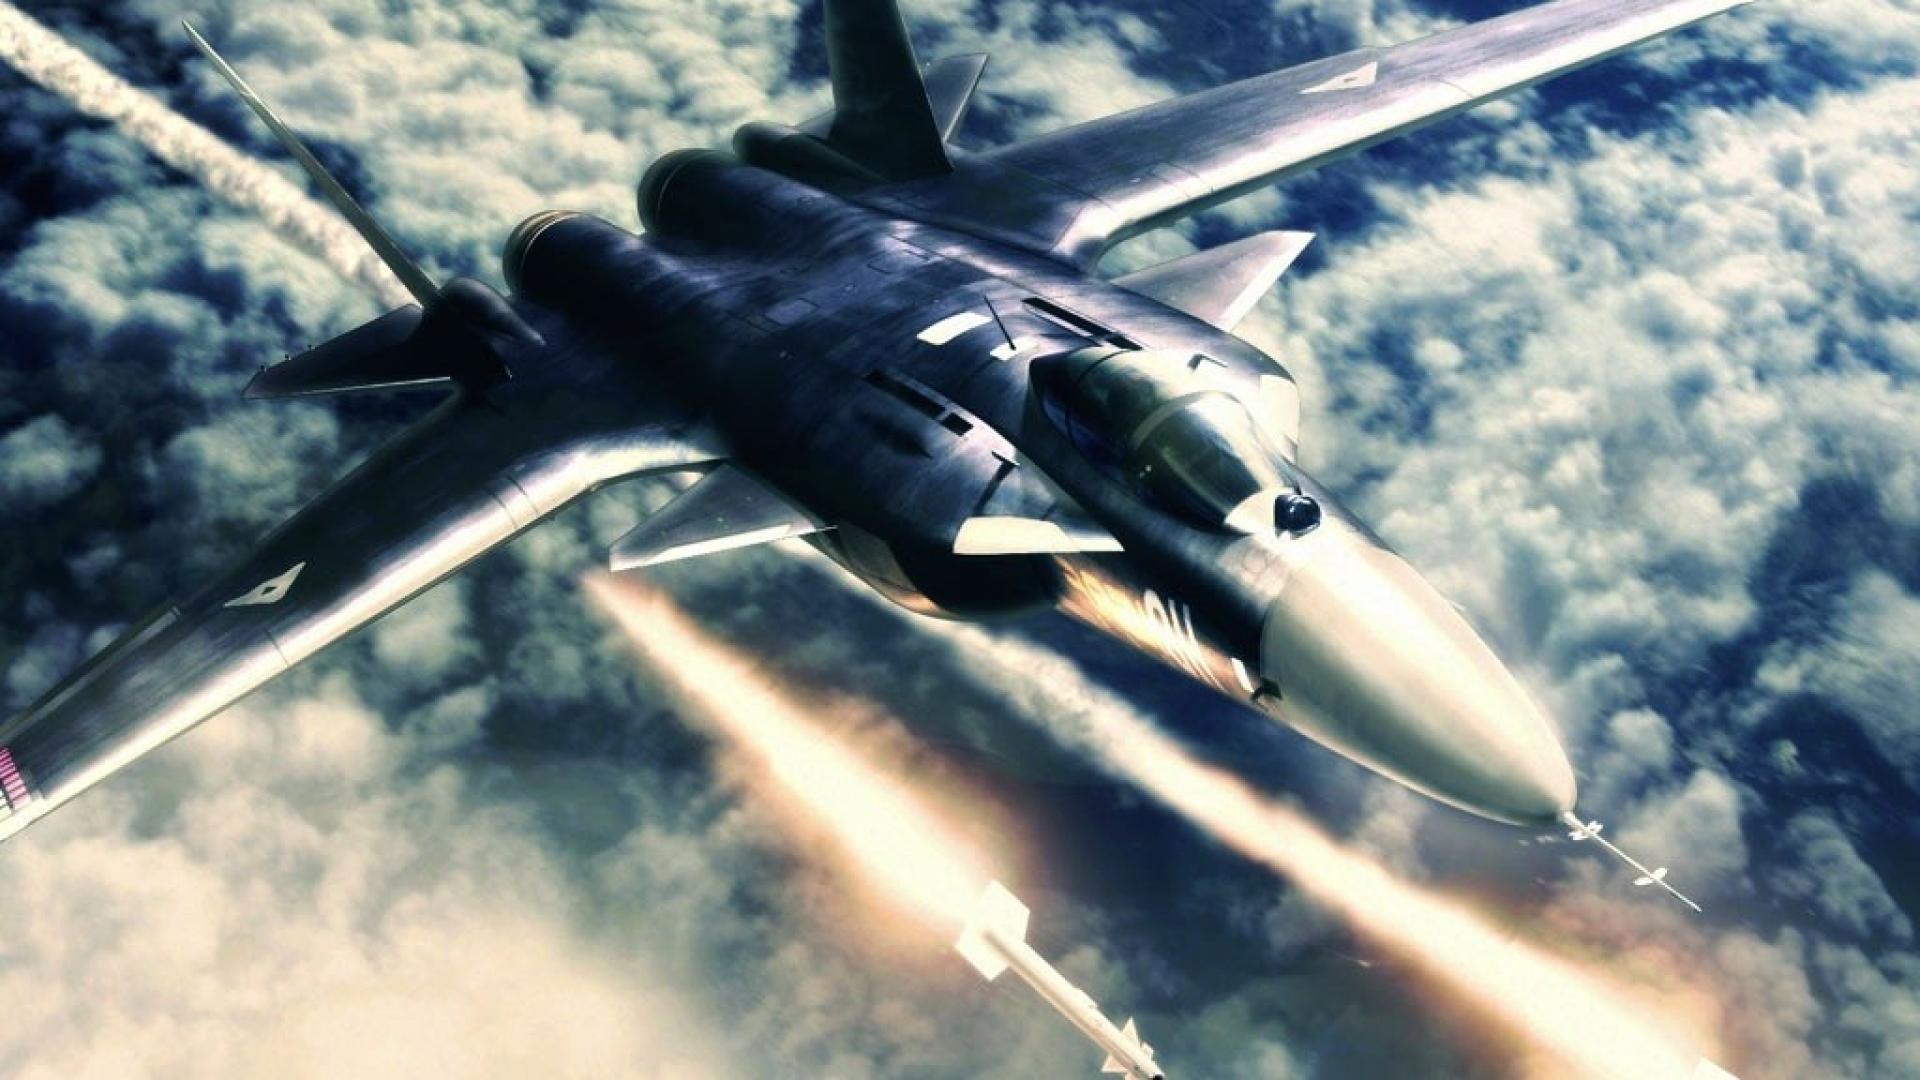 Ace Combat 7 Skies Unknown Wallpapers in Ultra HD  4K  Gameranx